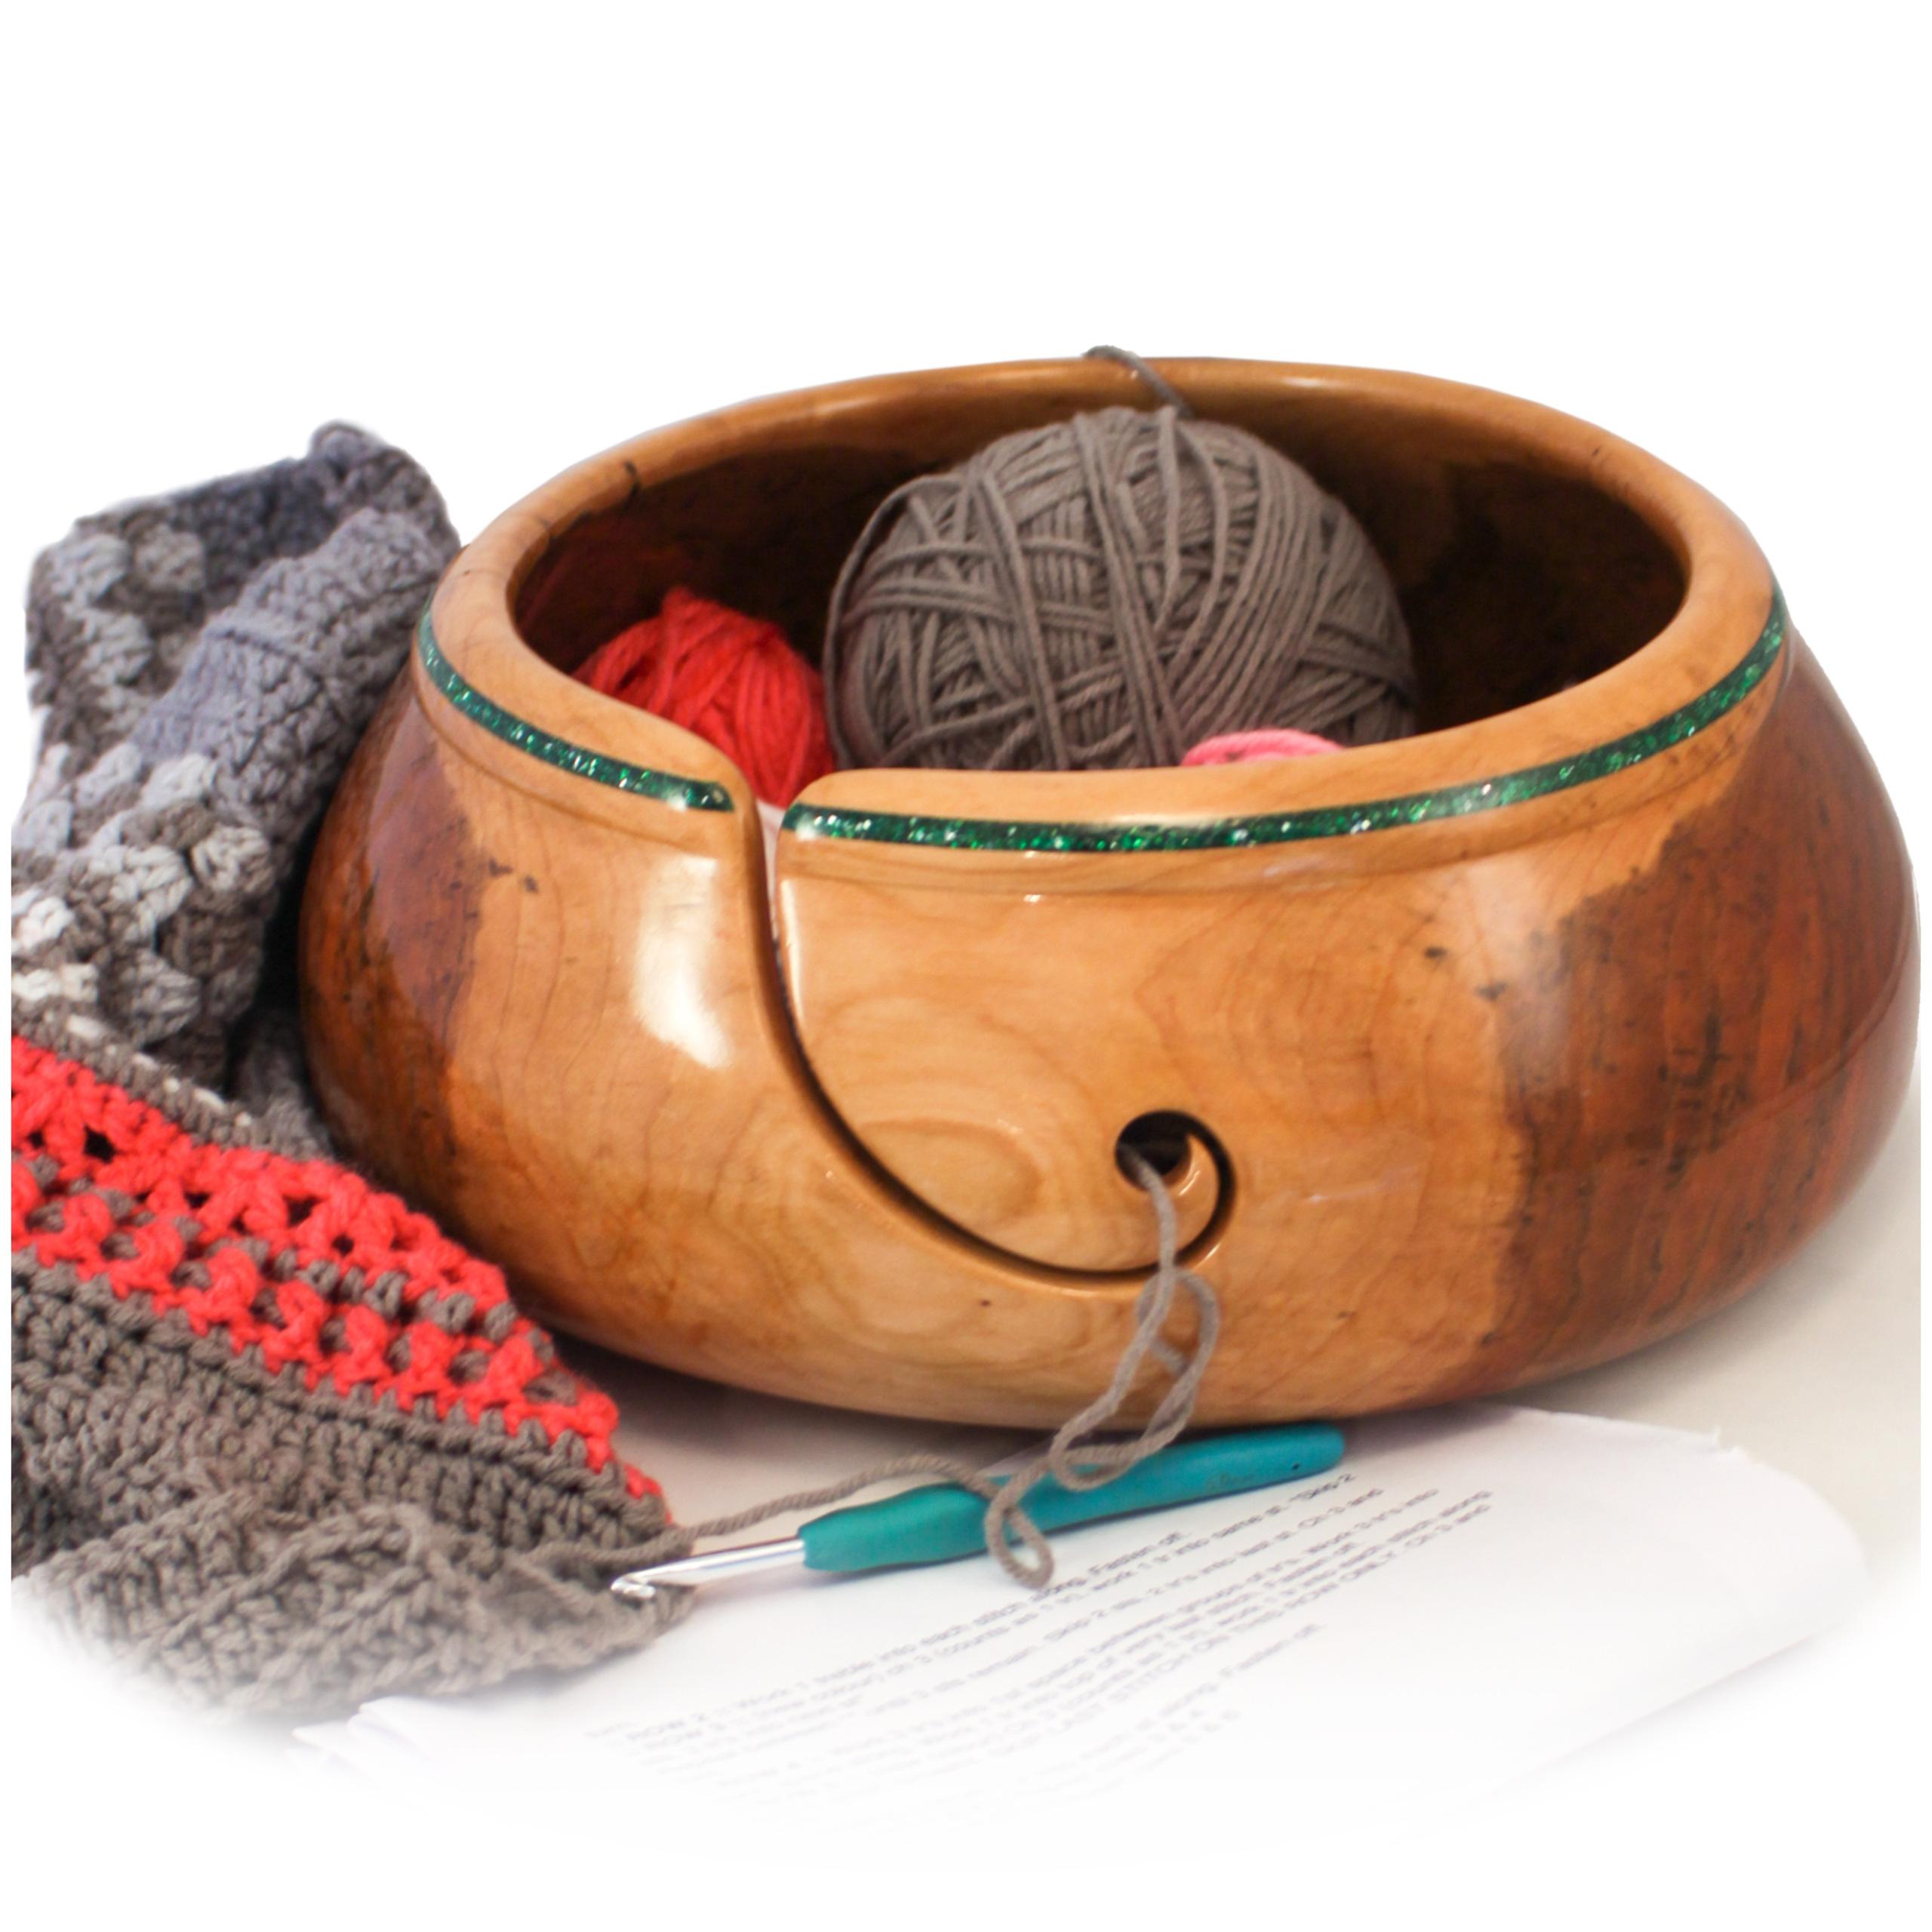 Always Deathly Hallows Large Yarn Bowl - 12 in.